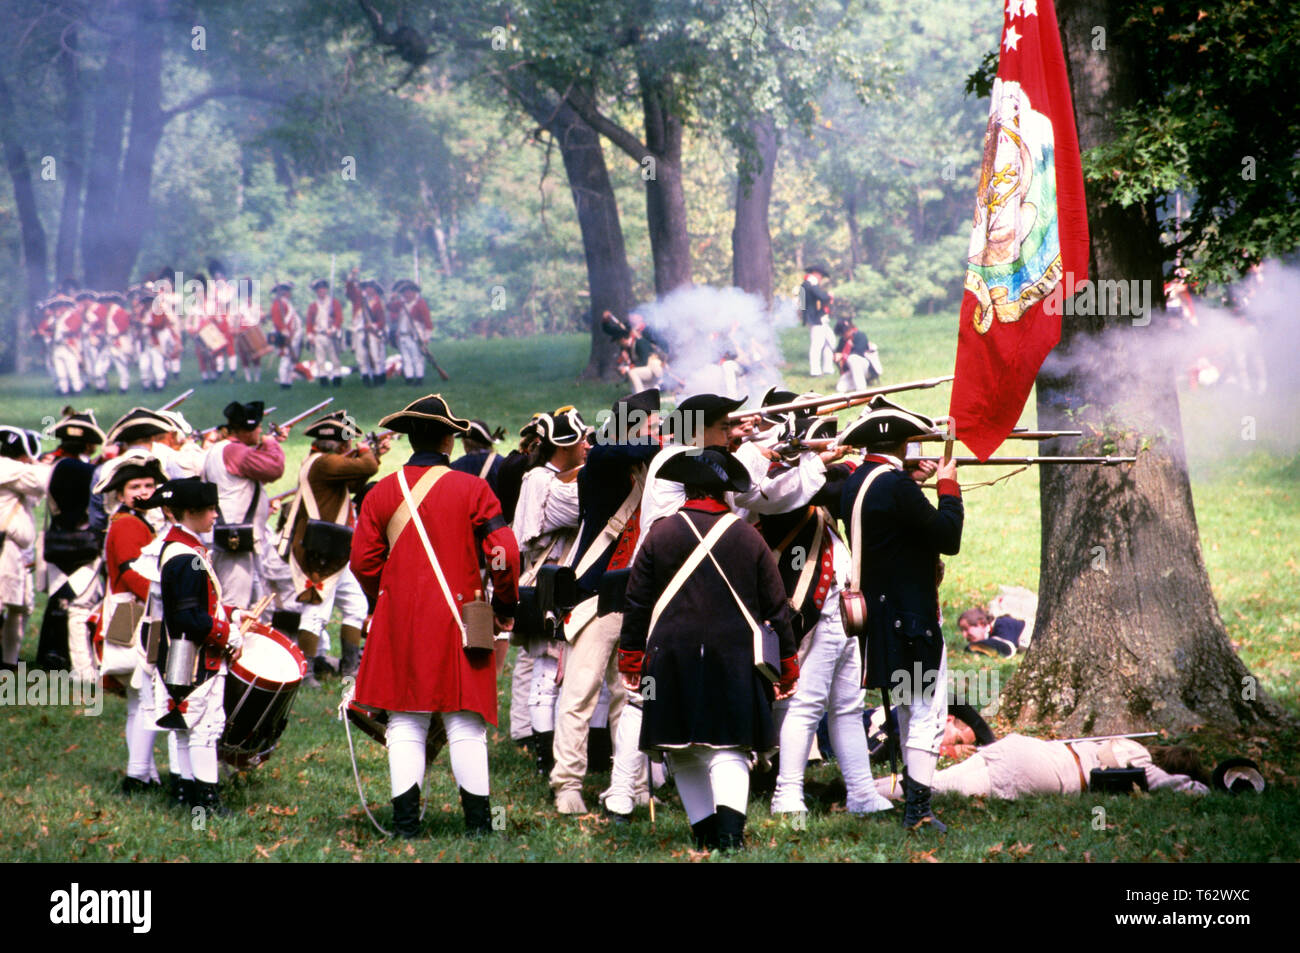 HISTORICAL REENACTMENT OF BATTLE OF BRANDYWINE SEPTEMBER 11 1777 AMERICAN REVOLUTIONARY WAR CHADDS FORD PA USA - kh12948 MCG002 HARS STRATEGY PA RECREATION NORTHEAST 1776 UNIFORMS WAR OF INDEPENDENCE COMMONWEALTH MID-ATLANTIC REGION MOTION BLUR EAST COAST KEYSTONE STATE REENACTORS REVOLT AMERICAN REVOLUTIONARY WAR 1770s AMERICAN REVOLUTION BRITISH VICTORY COLONIES CONFLICTING COOPERATION REENACTMENT BATTLING OLD FASHIONED Stock Photo